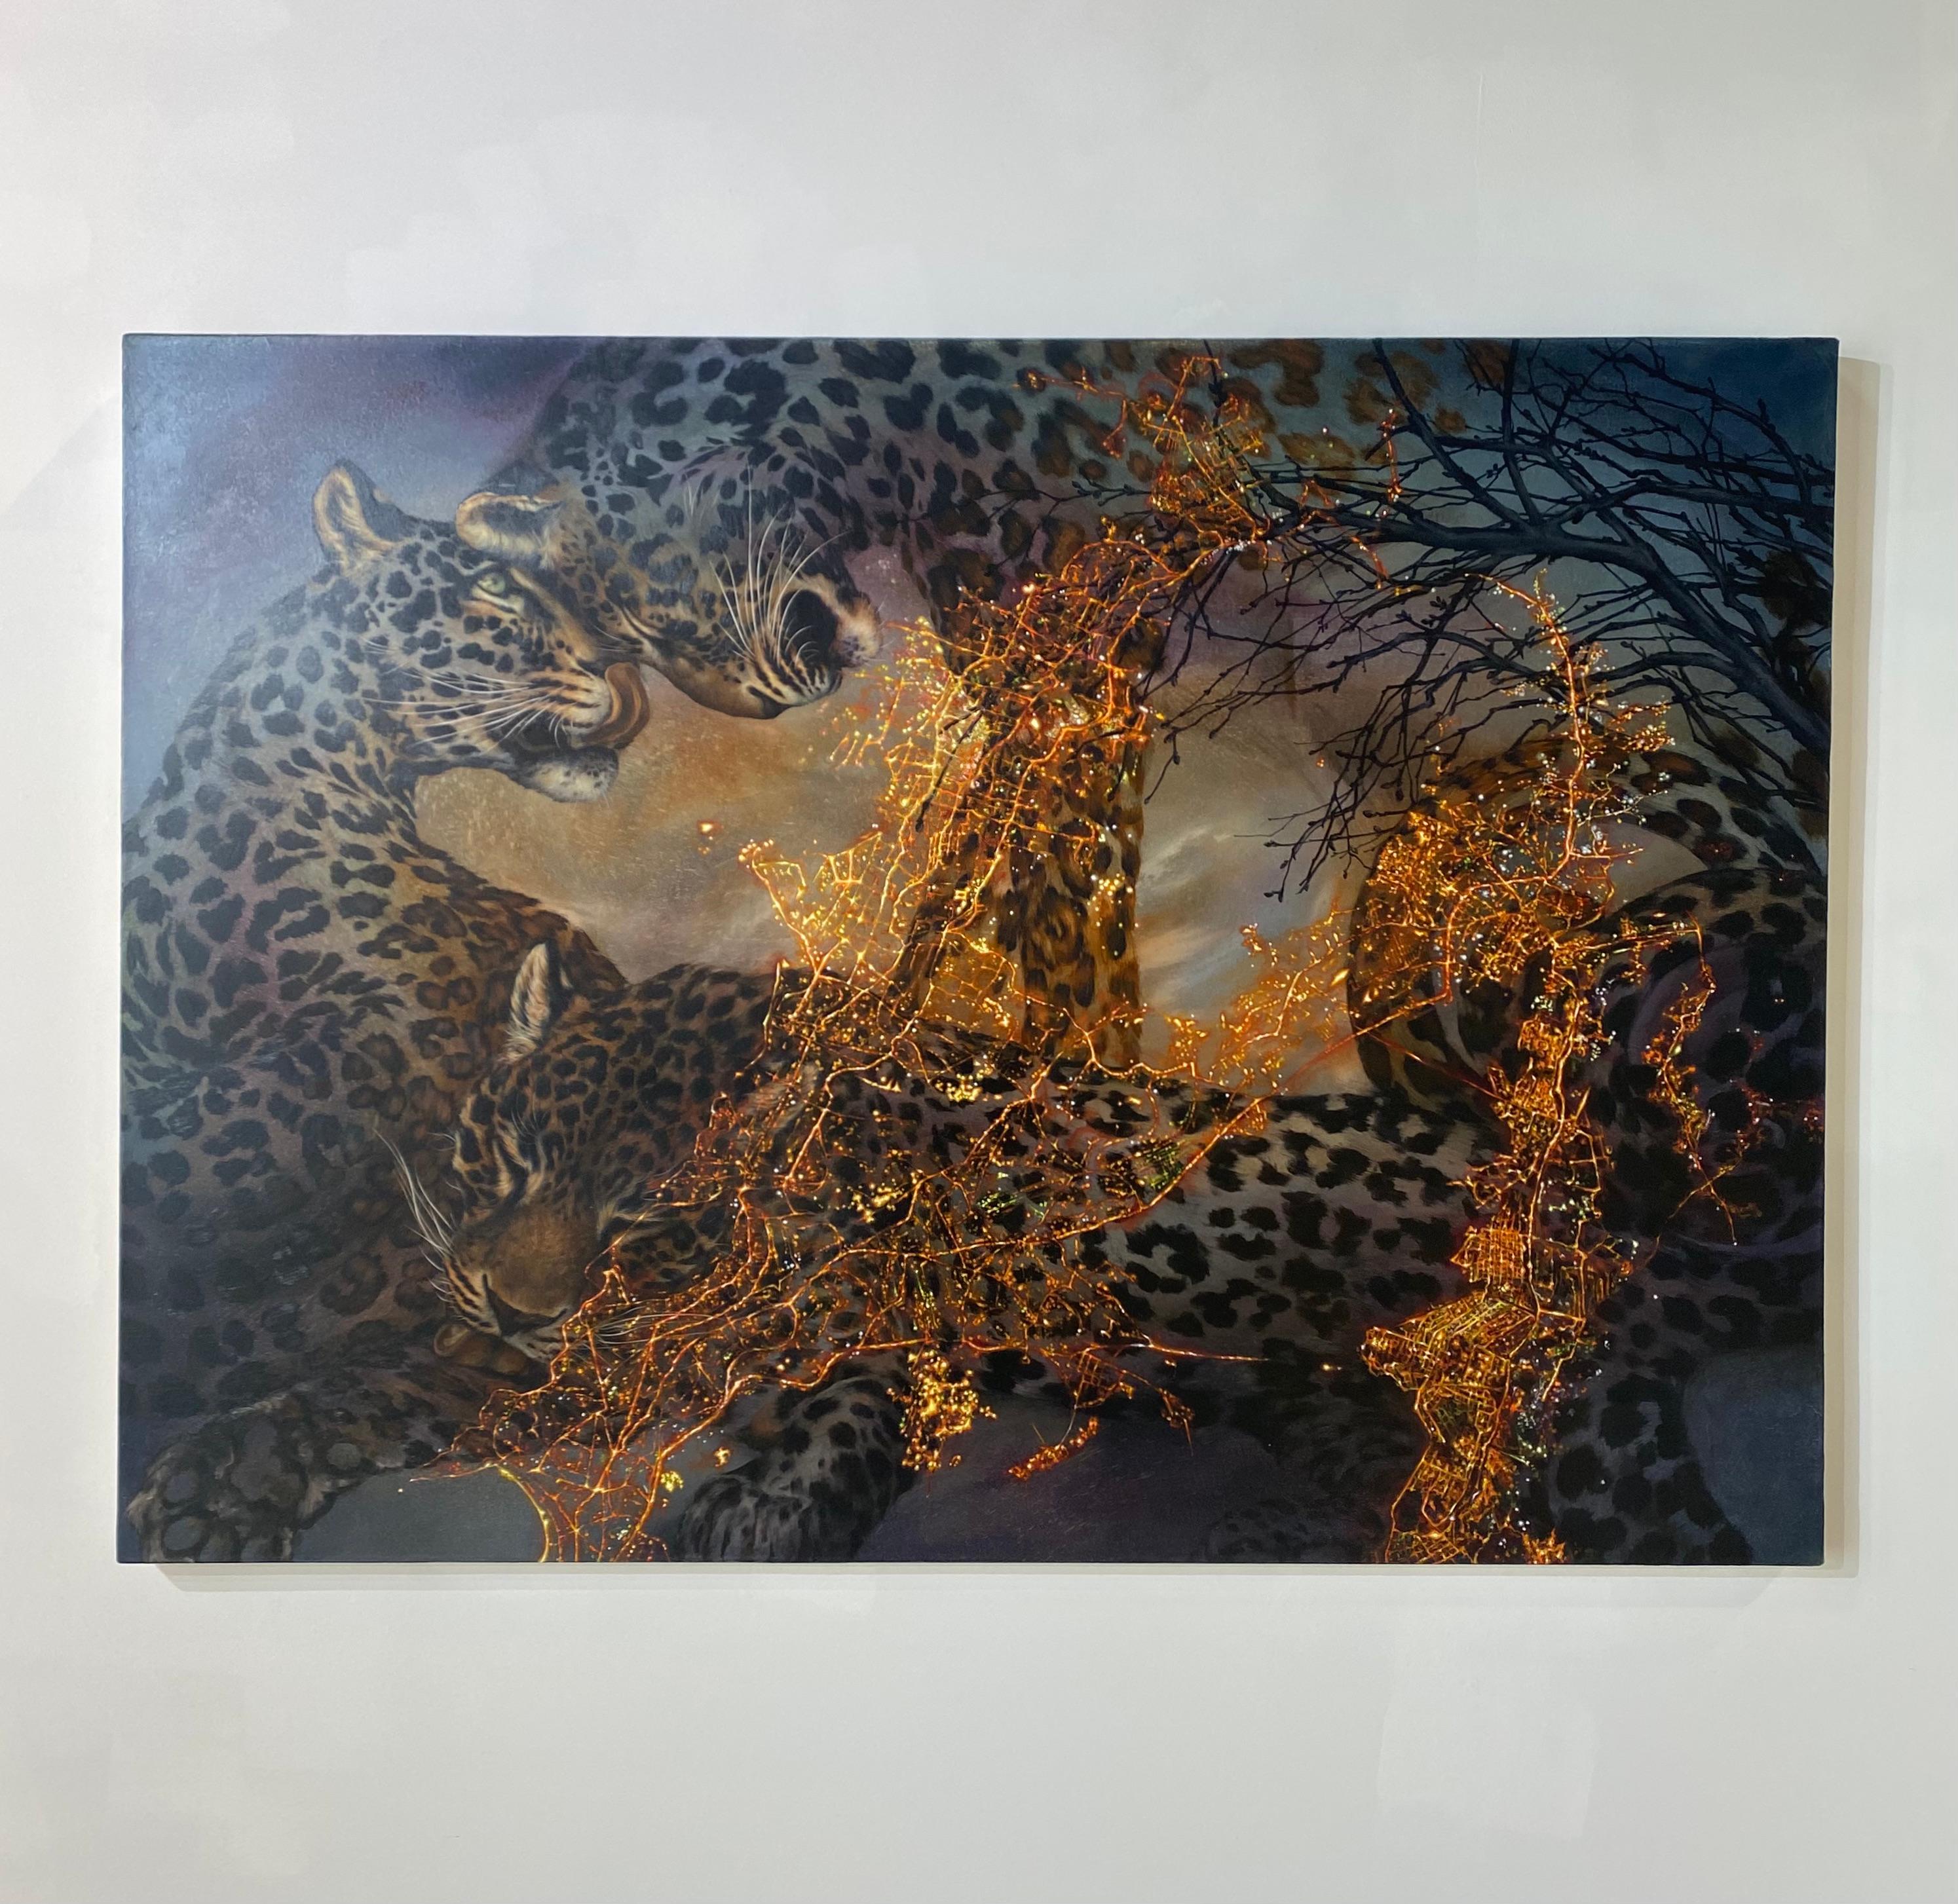 Three spotted leopards in dynamic, powerful poses are dramatic and meticulously painted, layered beneath an intricately detailed map of Mumbai, India in bright shimmering gold. In this oil painting with mica powder, Francine Fox's excellent use of